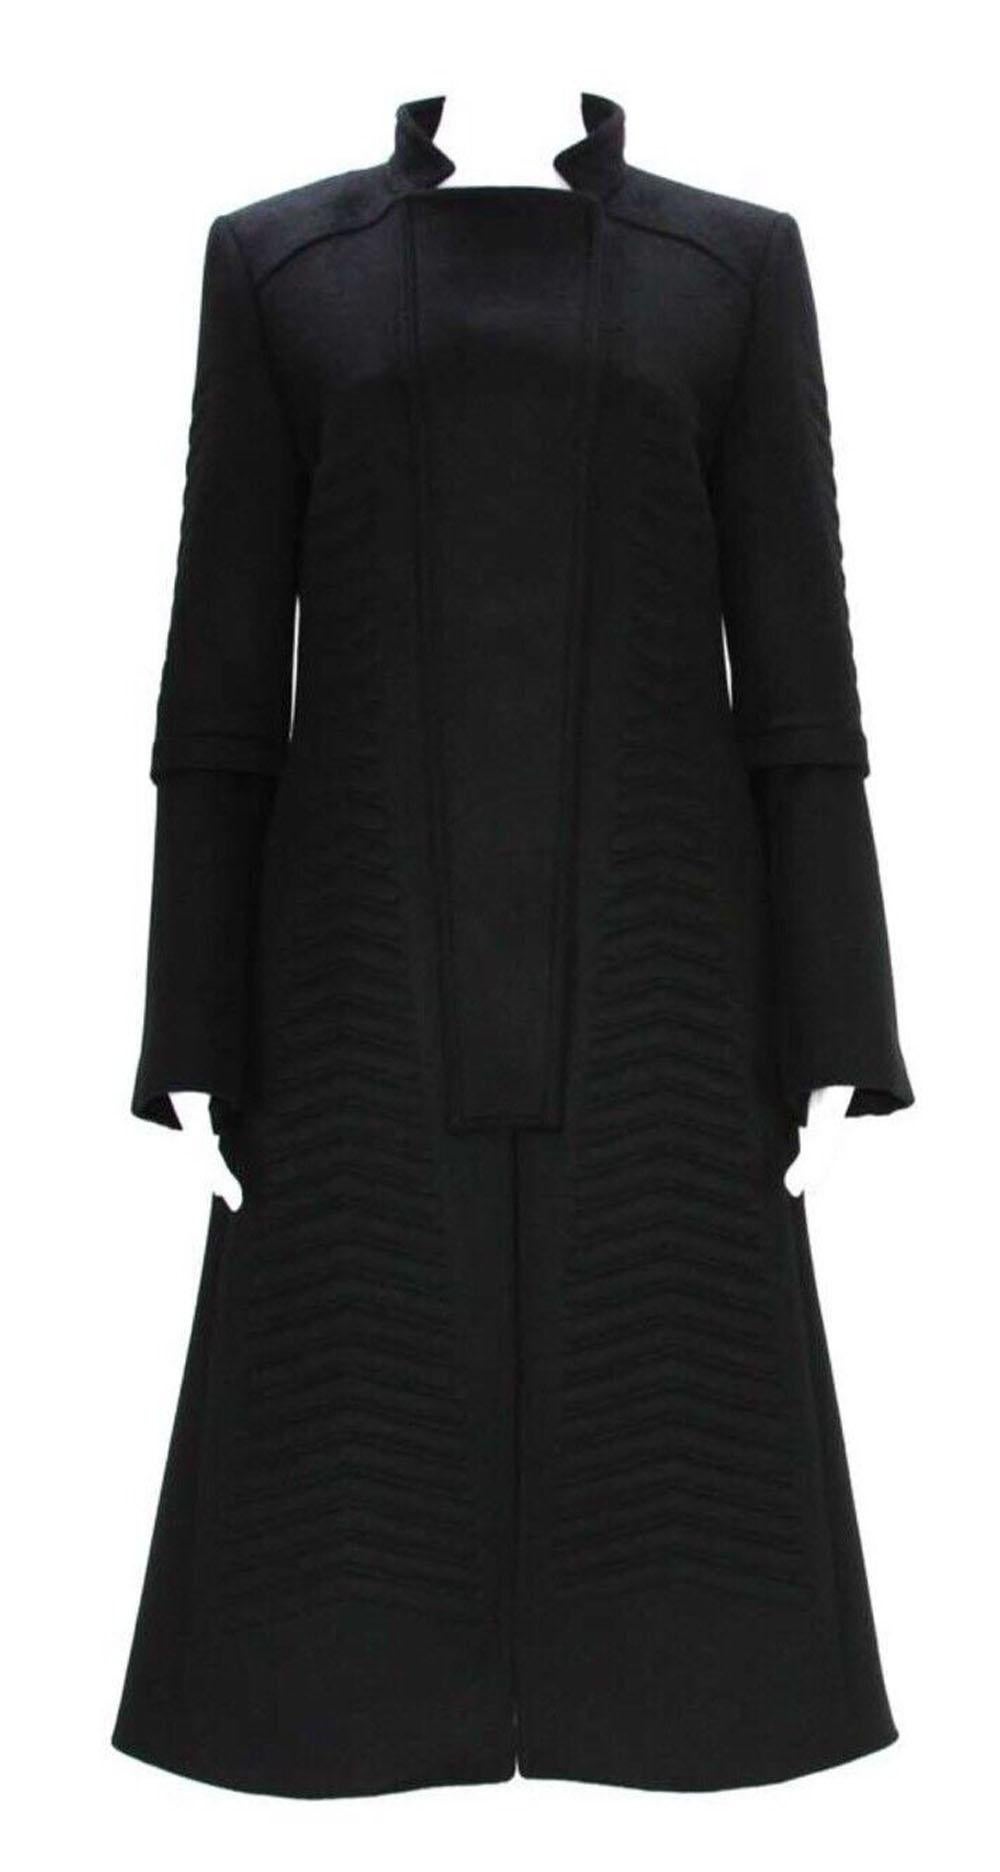 Tom Ford for Gucci Black Coat with Belt
F/W 2004 Collection
Black Angora Wool, Quilted in Chevron Pattern, Double Breasted, Snaps Closure, Side Pockets. 
Zip Accent Bell Sleeves, Fully Lined, Removable Leather Rope Belt, Soft and Smooth